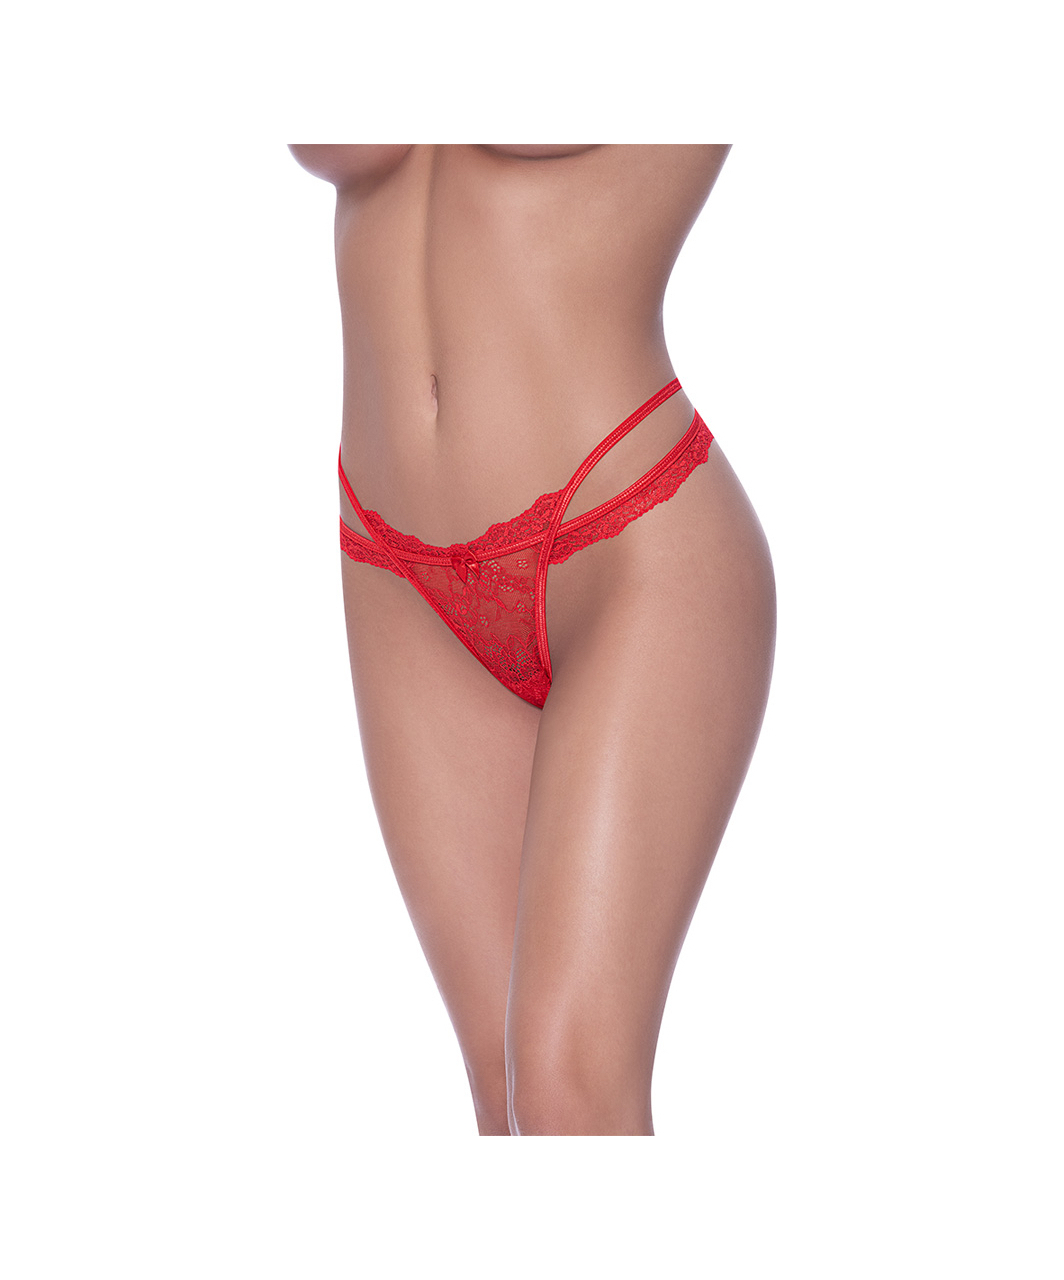 Exposed red crotchless string